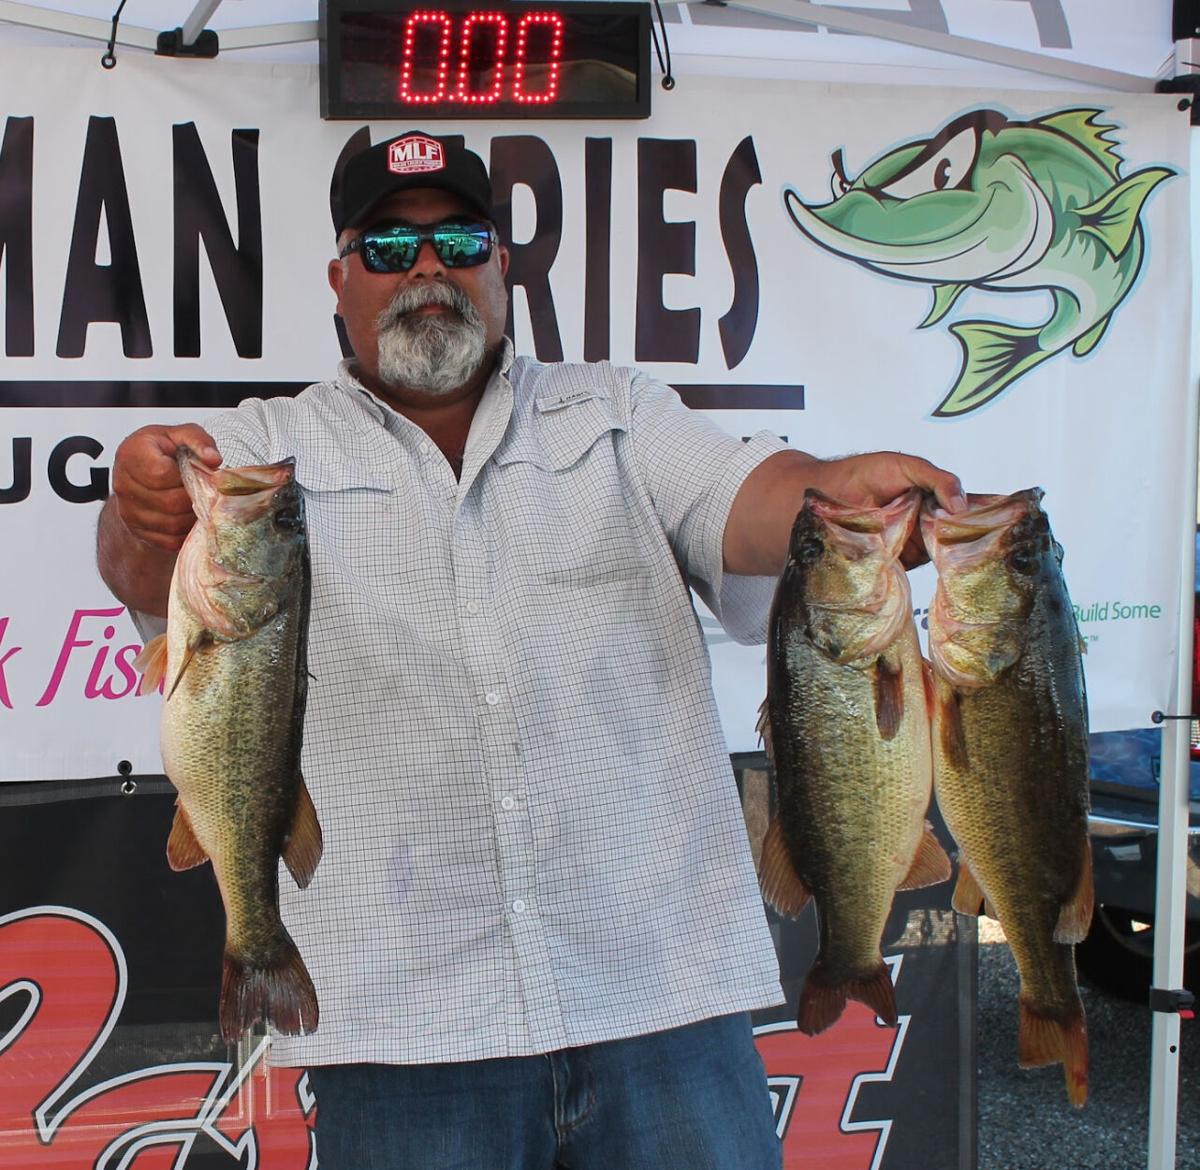 Oldham and Buitron win Tuff-Man Series' third event